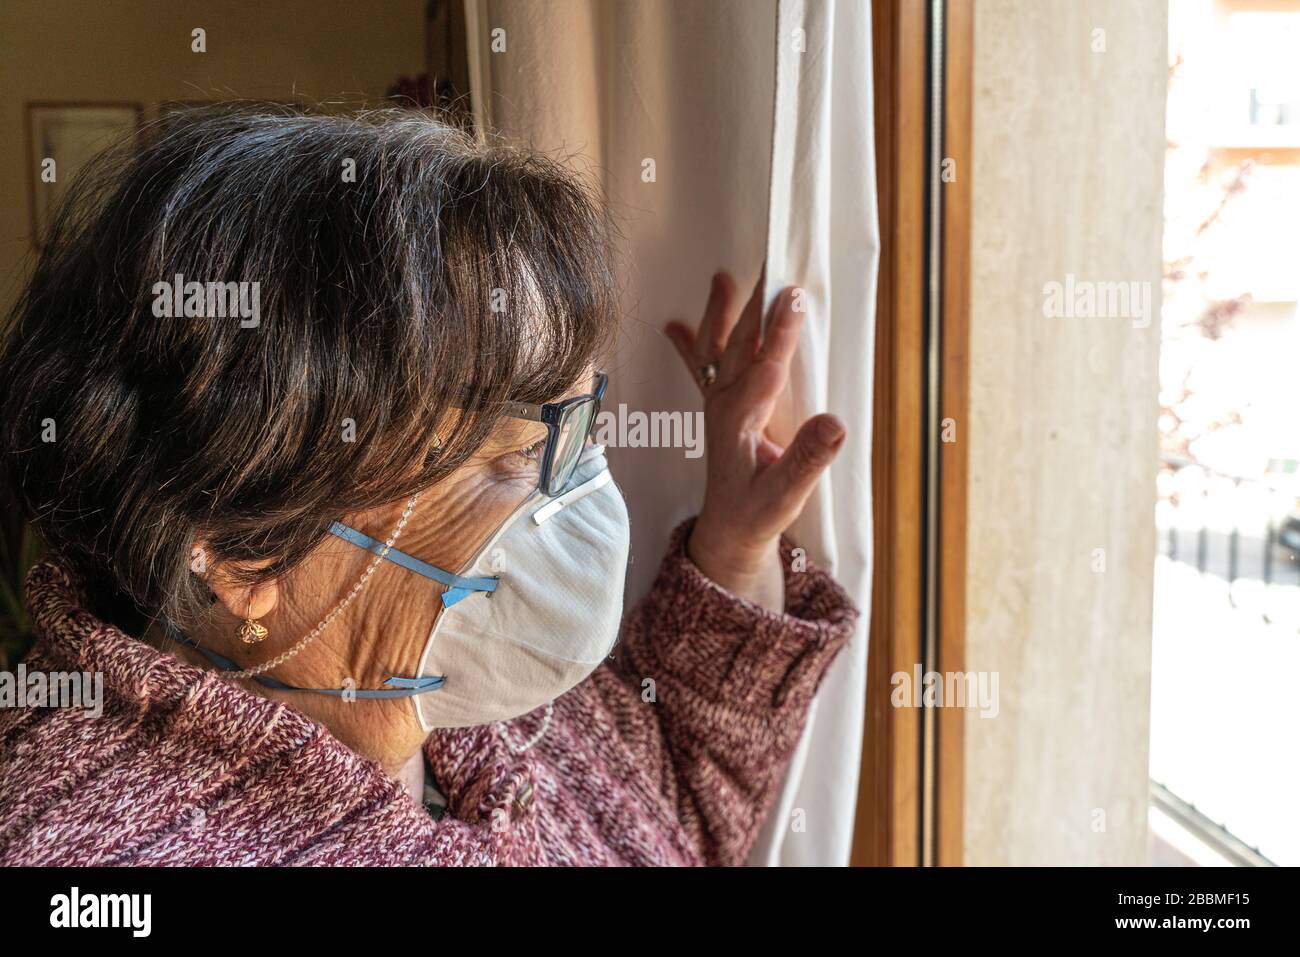 quarantine of elderly woman with face mask looks out the window Stock Photo